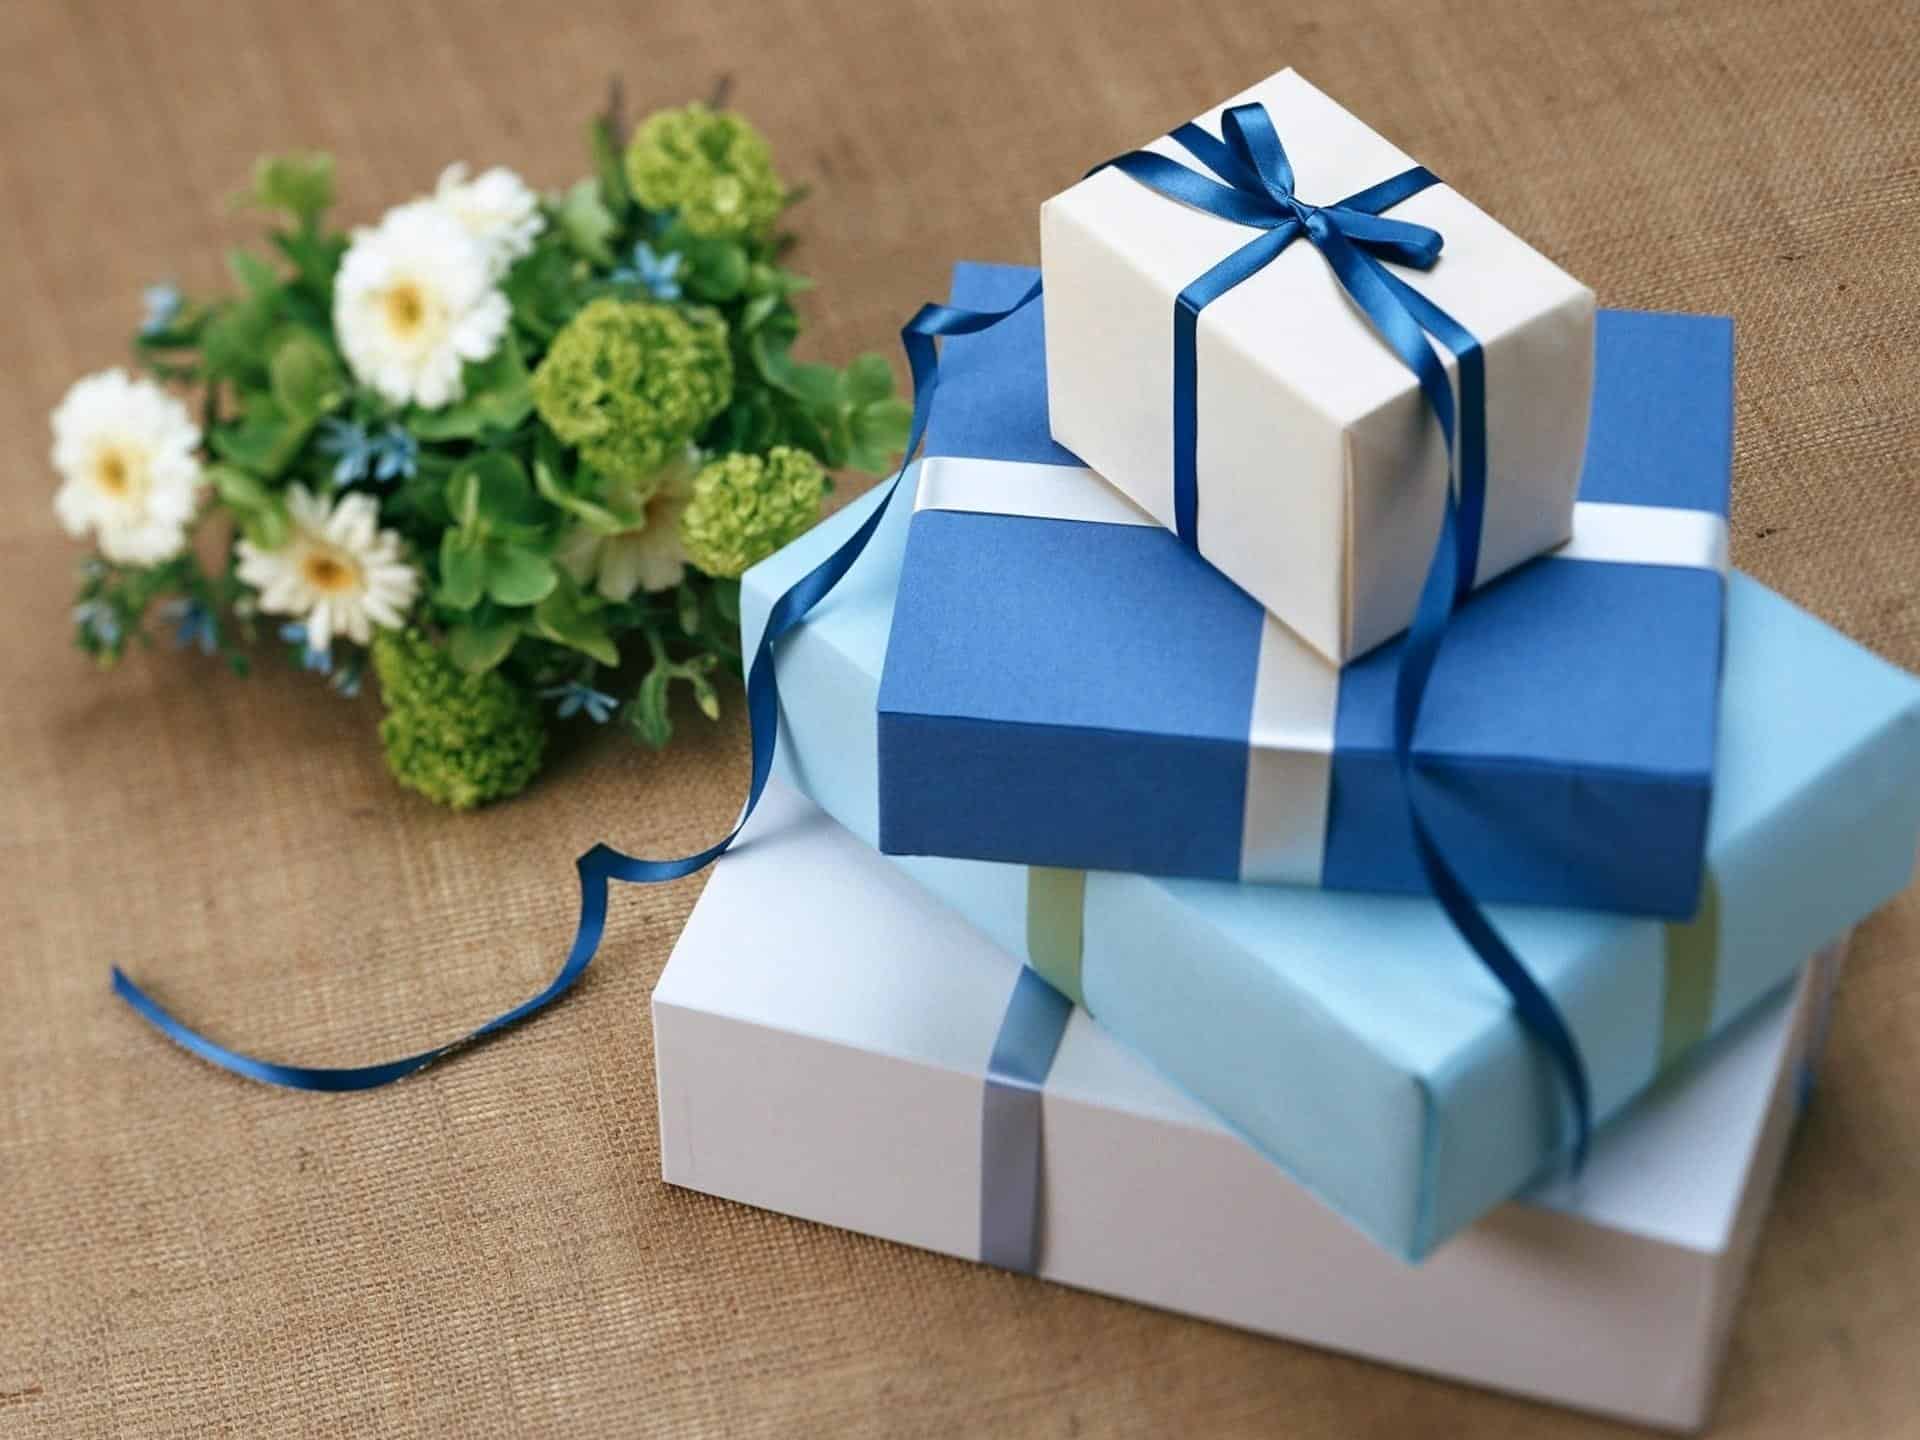 What Do I Bring to a Bridal Shower? - Gift Tips & Etiquette